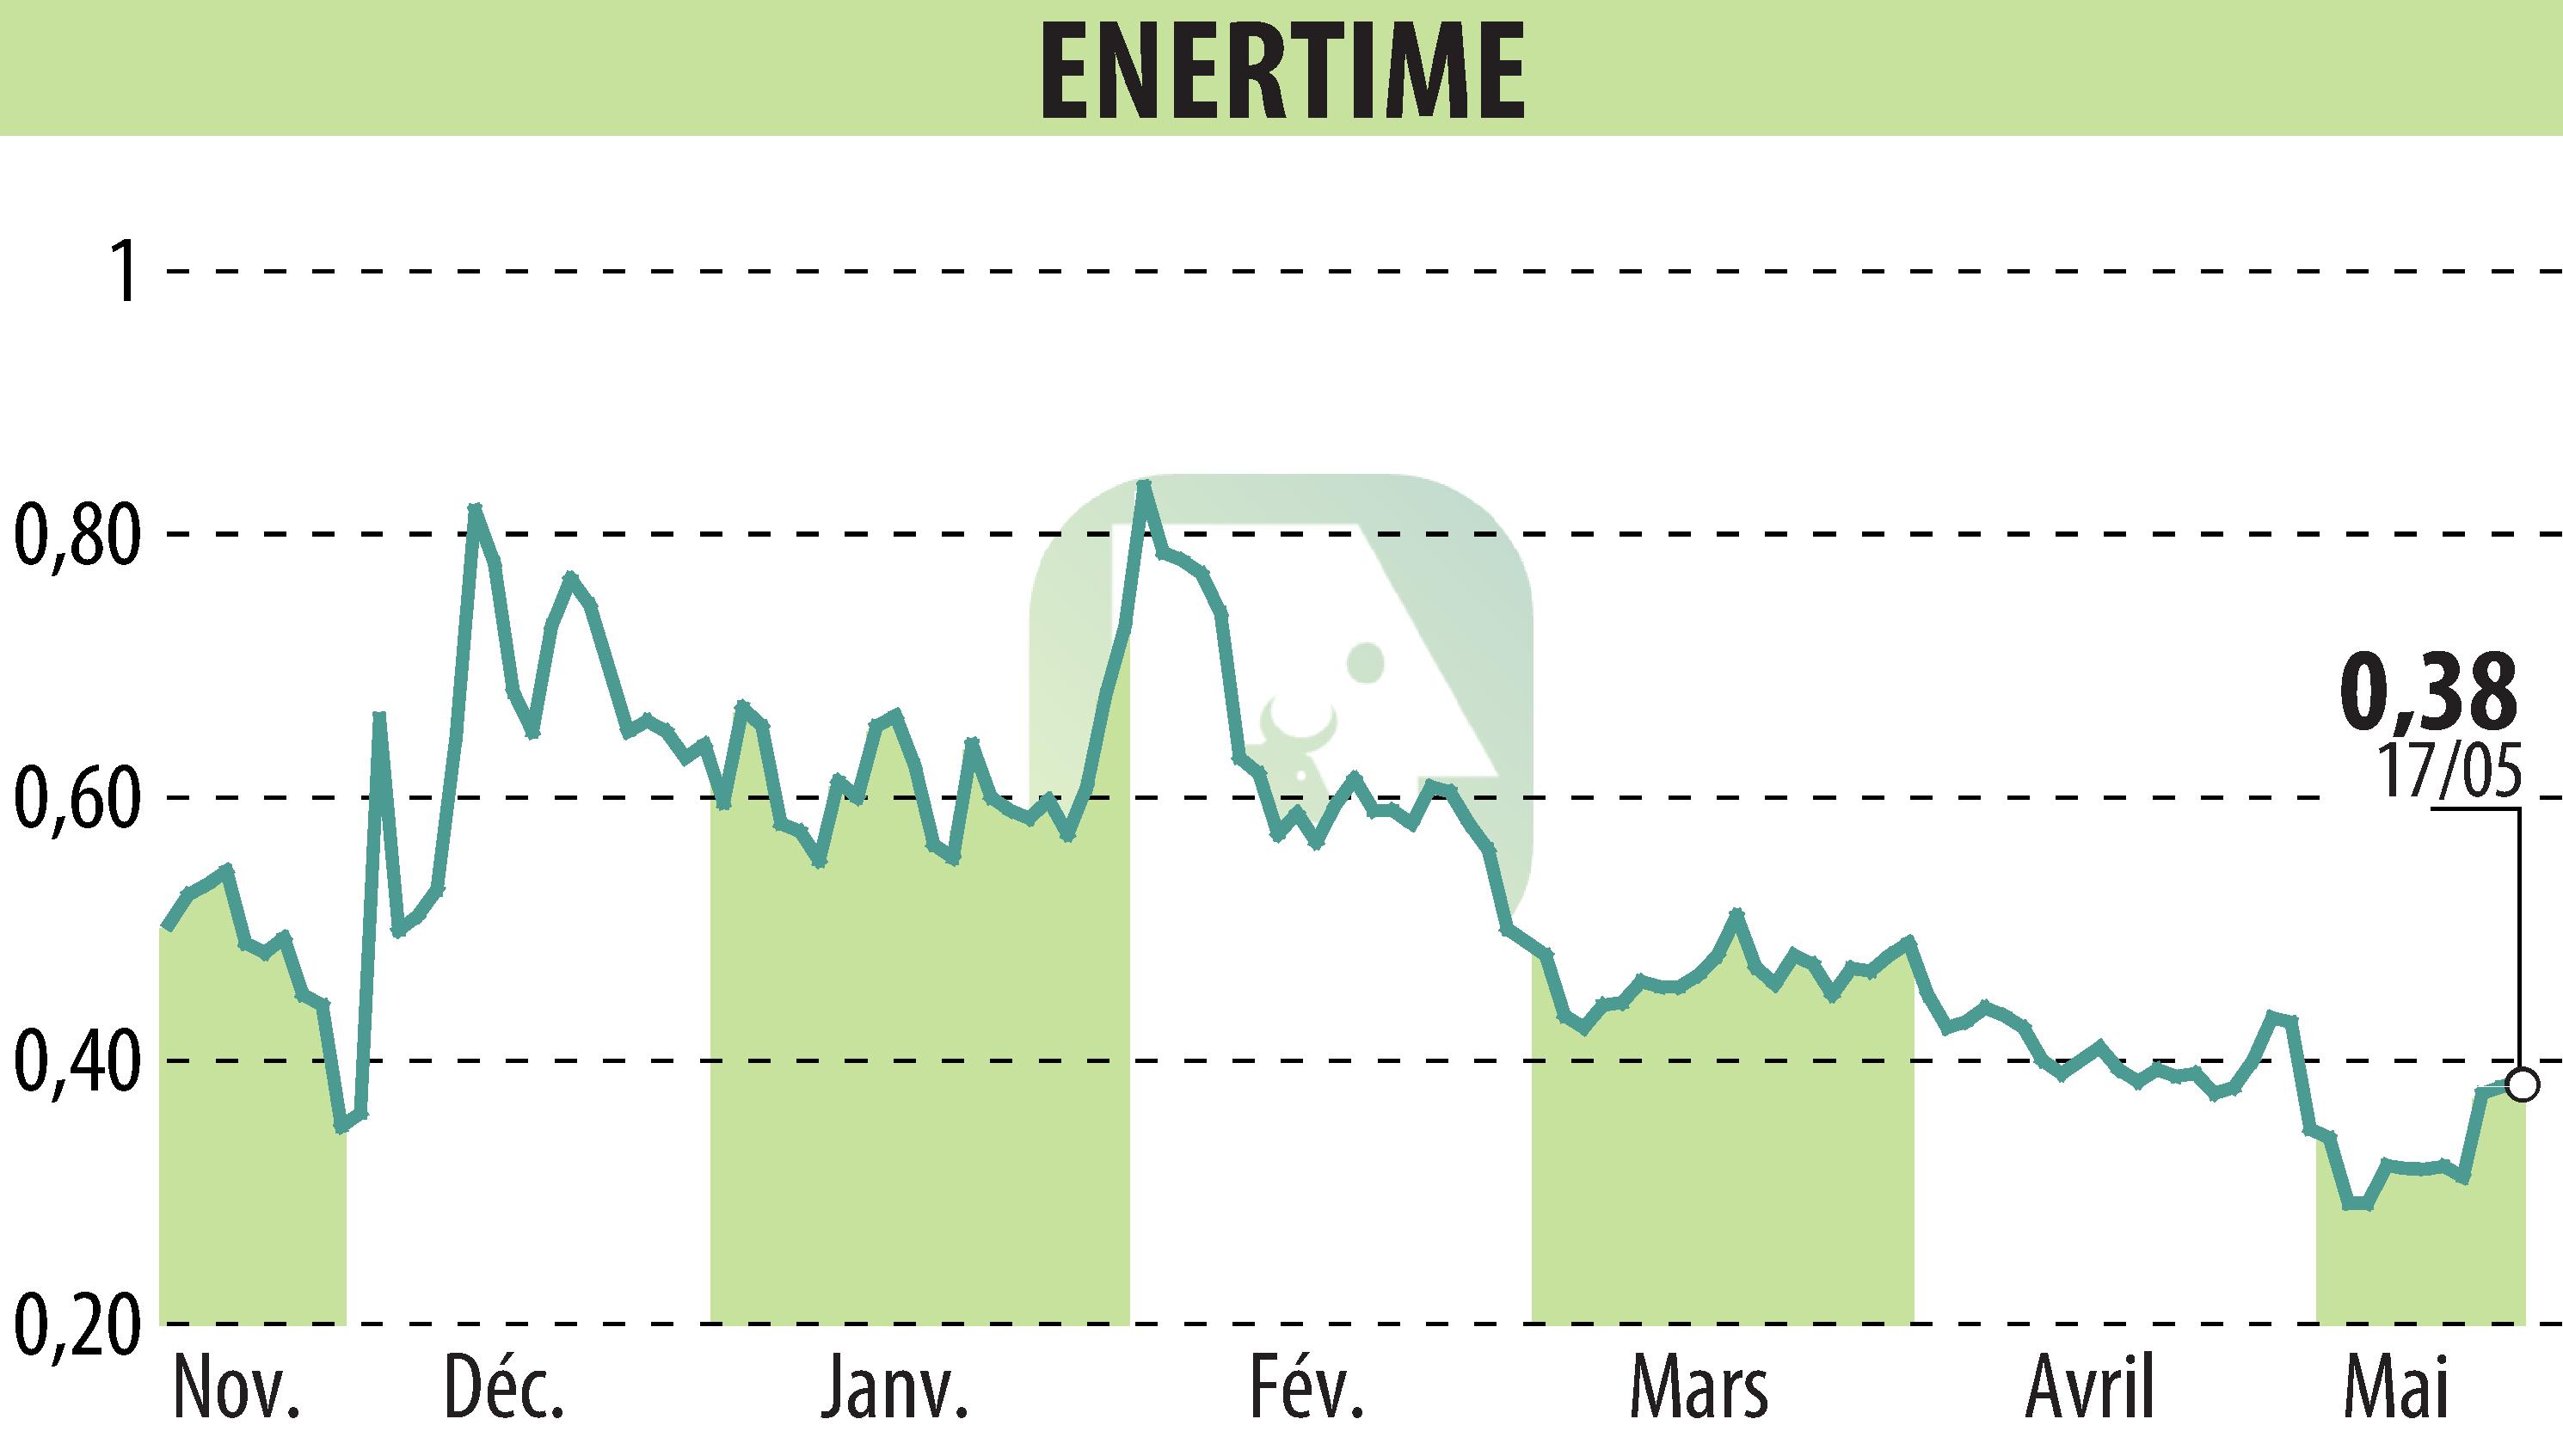 Stock price chart of ENERTIME (EPA:ALENE) showing fluctuations.